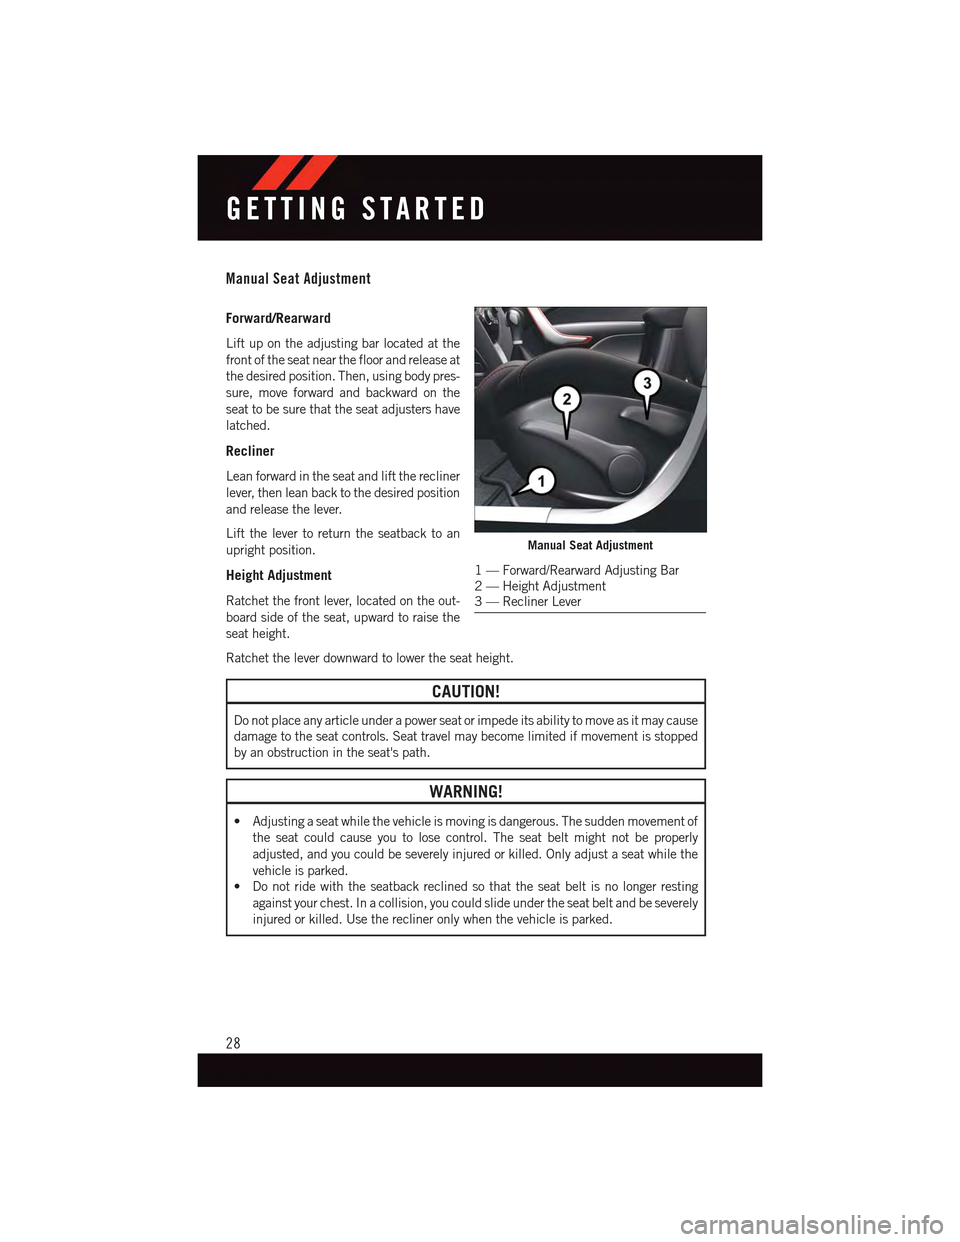 DODGE DART 2015 PF / 1.G User Guide Manual Seat Adjustment
Forward/Rearward
Lift up on the adjusting bar located at the
front of the seat near the floor and release at
the desired position. Then, using body pres-
sure, move forward and 